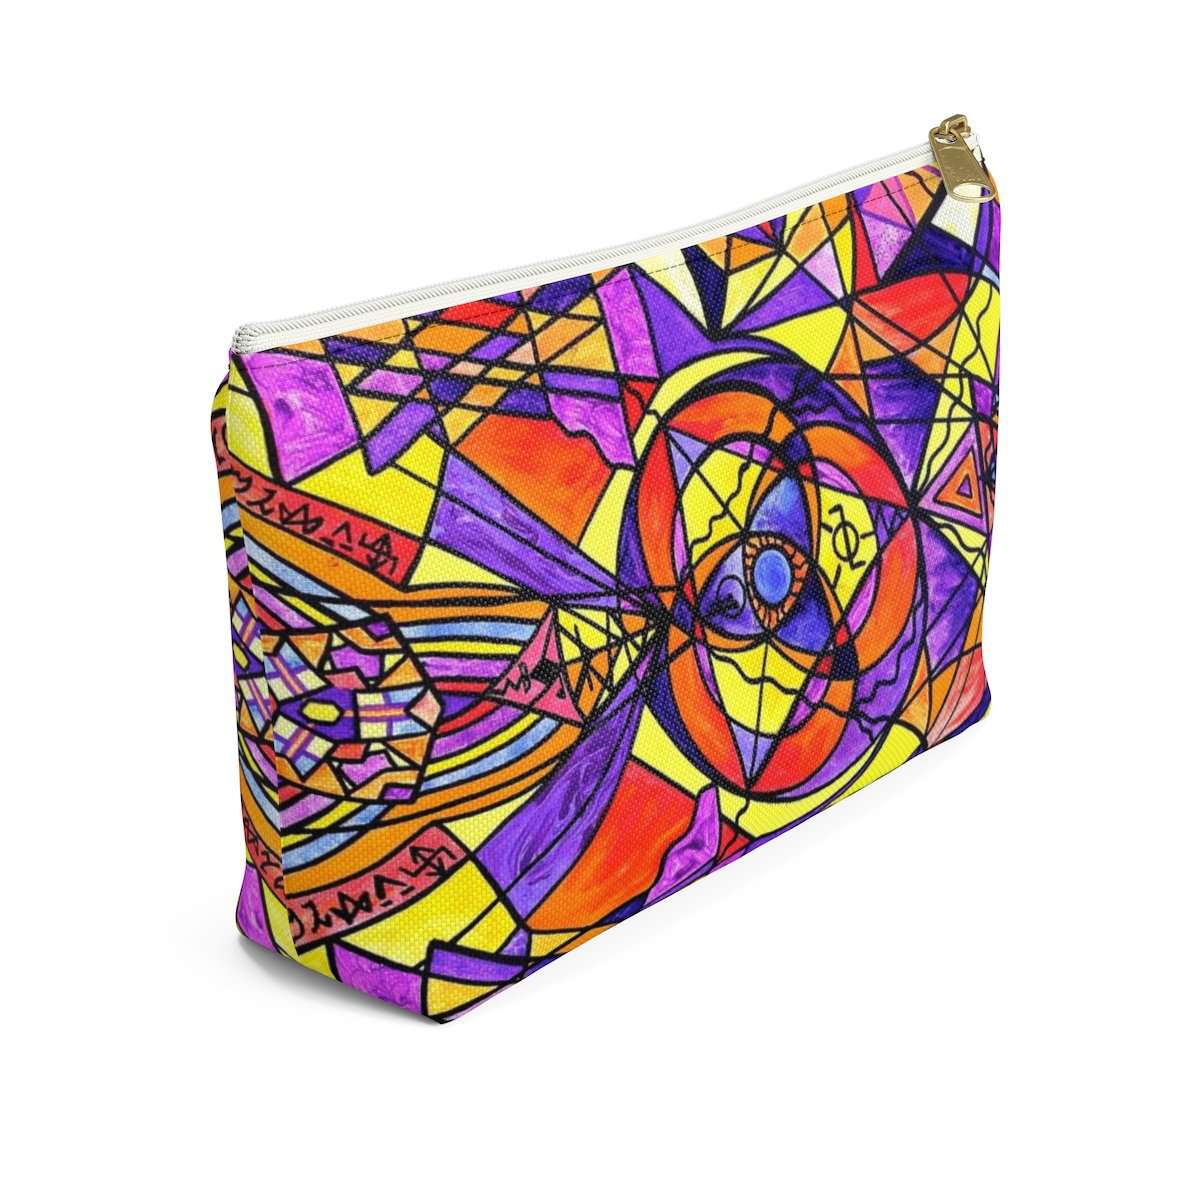 get-your-dream-of-the-destiny-grid-accessory-pouch-w-t-bottom-on-sale_3.jpg